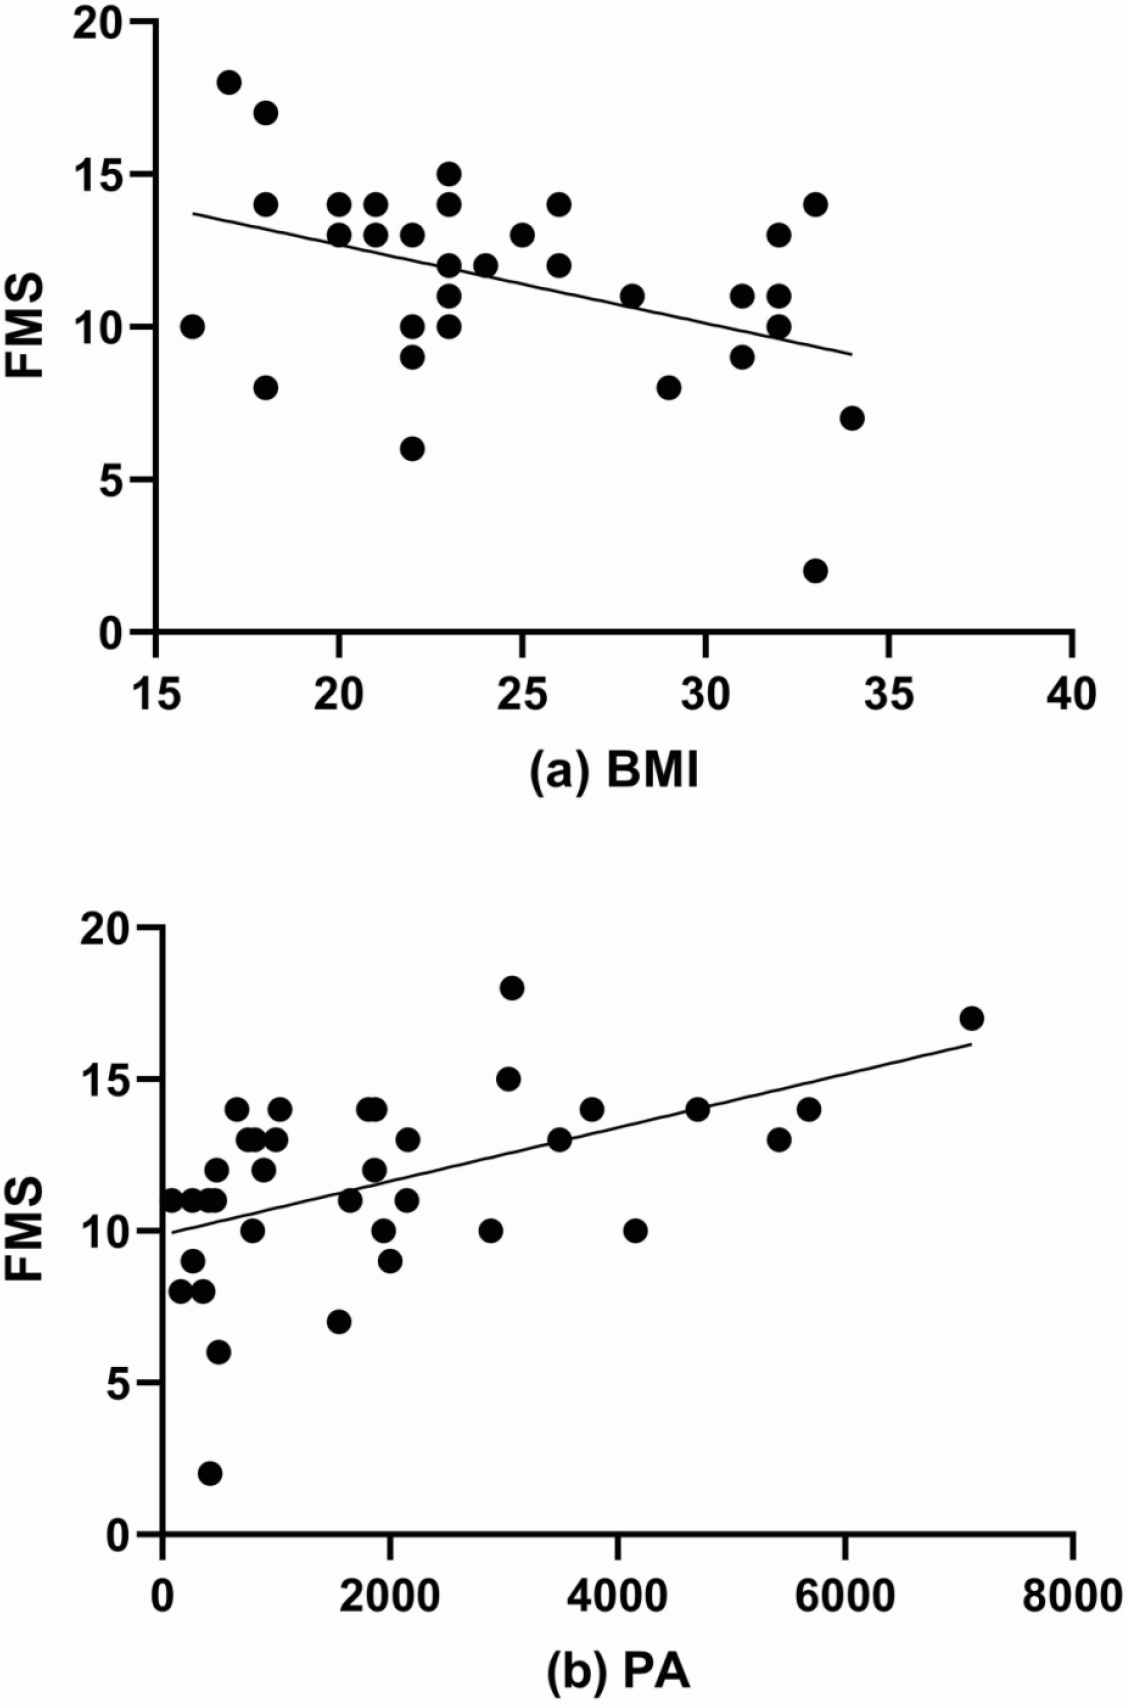 Scattergraph illustrating the relationship between (a) FMS score and BMI and (b) FMS score and PA.